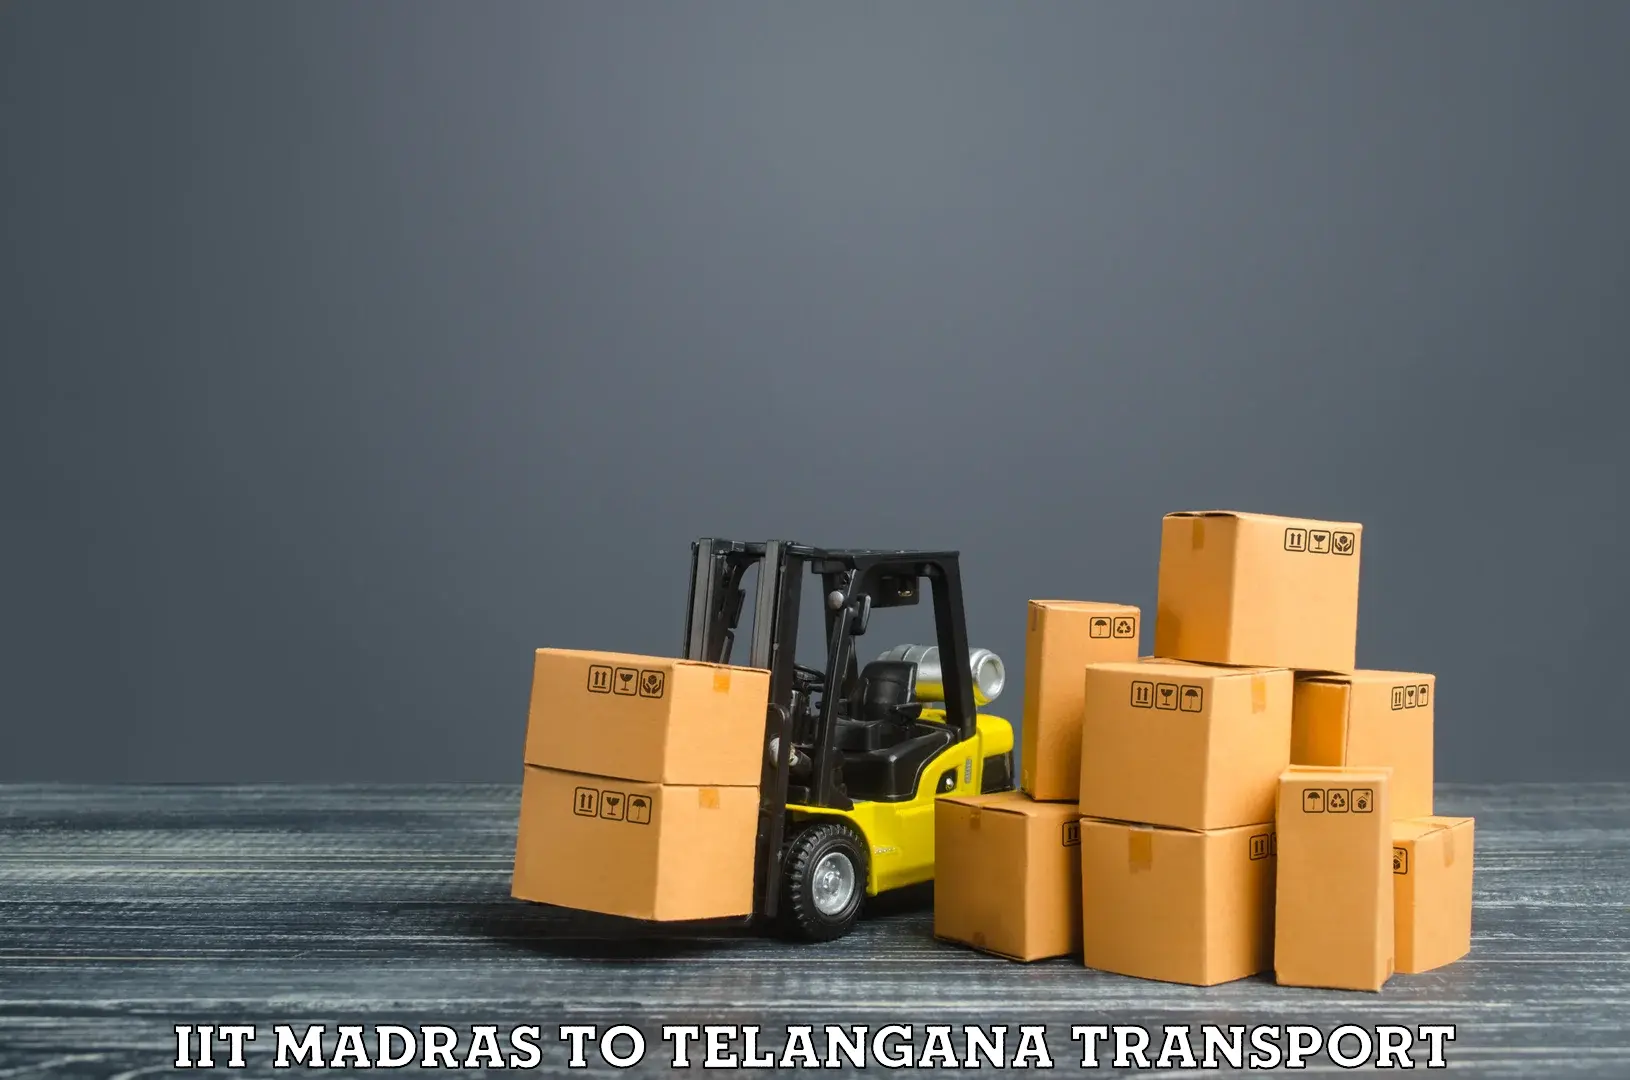 Daily transport service IIT Madras to Vemulawada